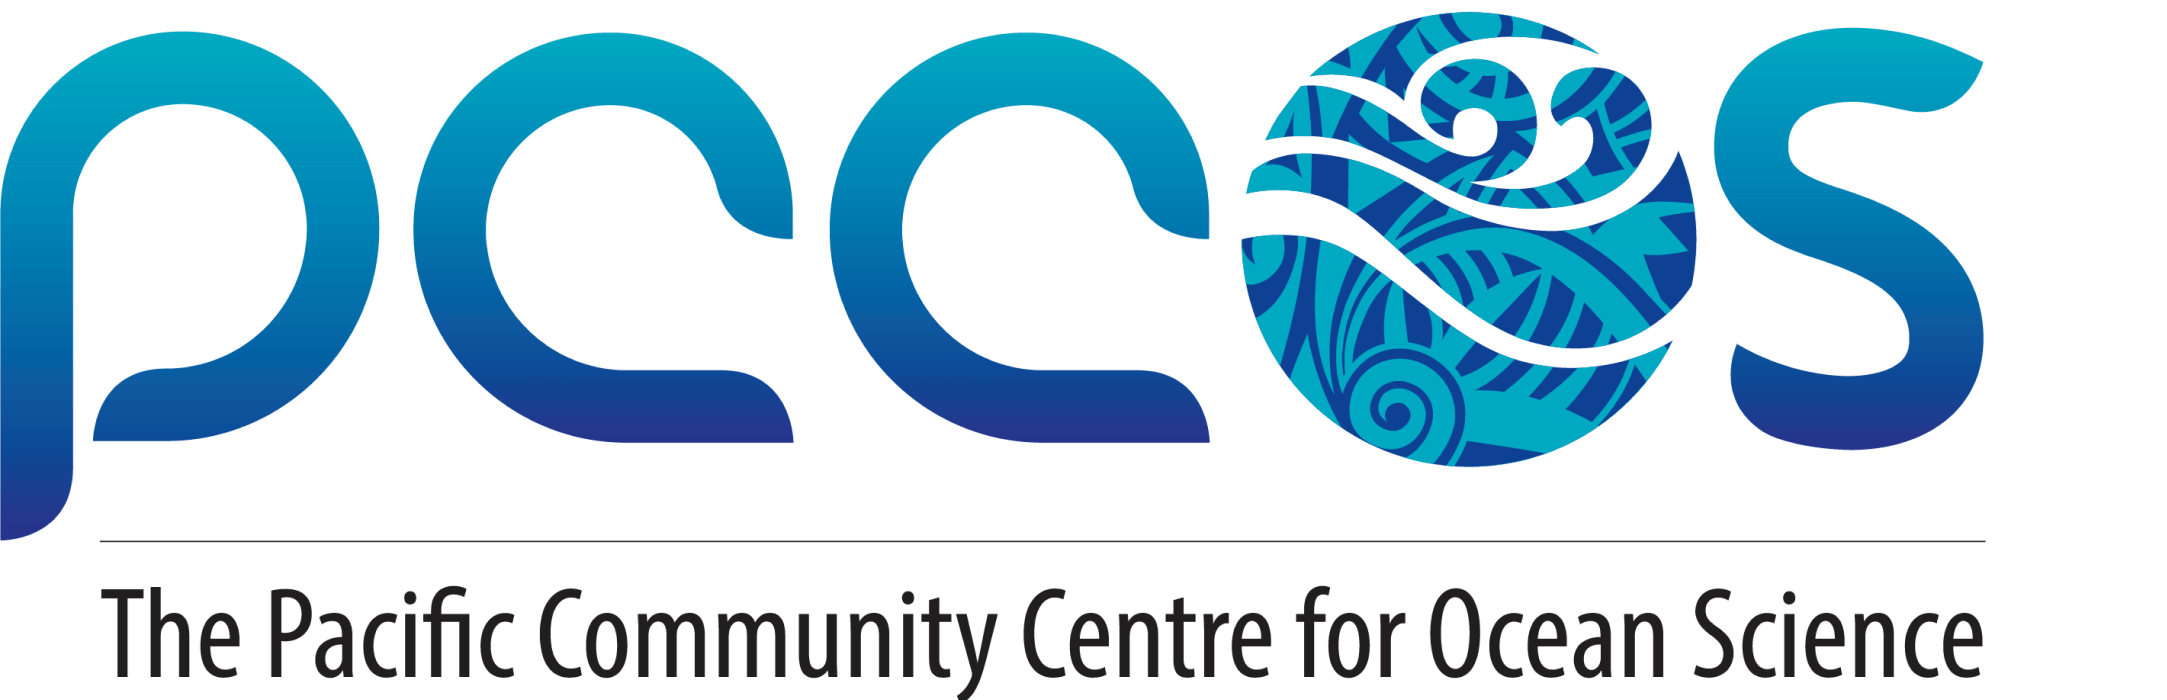 Pacific Community Centre for Ocean Science